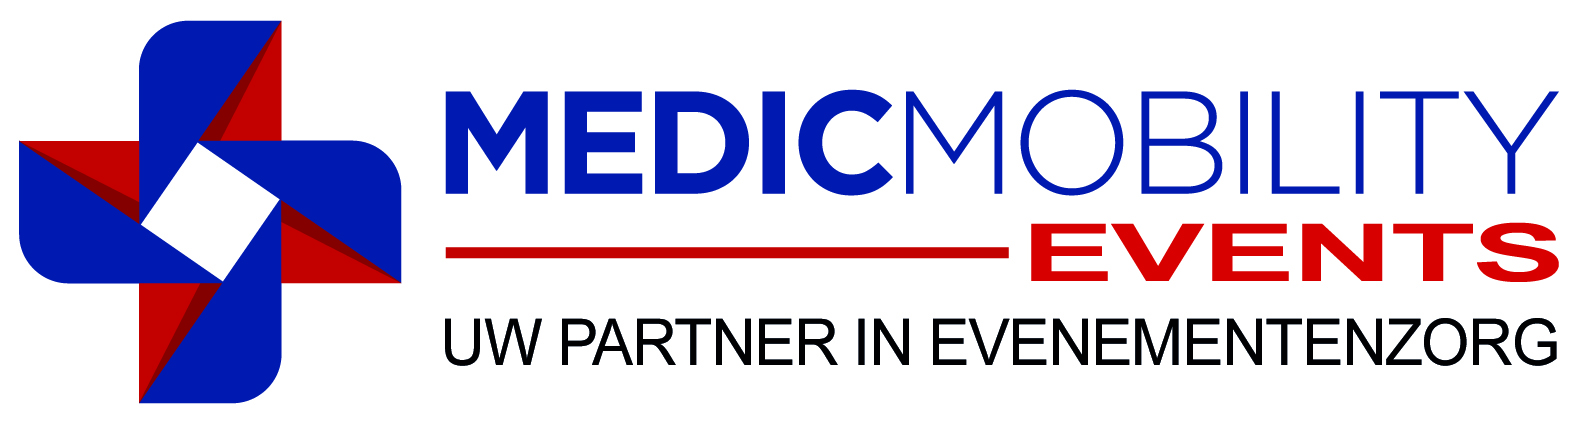 Medic Mobility Events NL